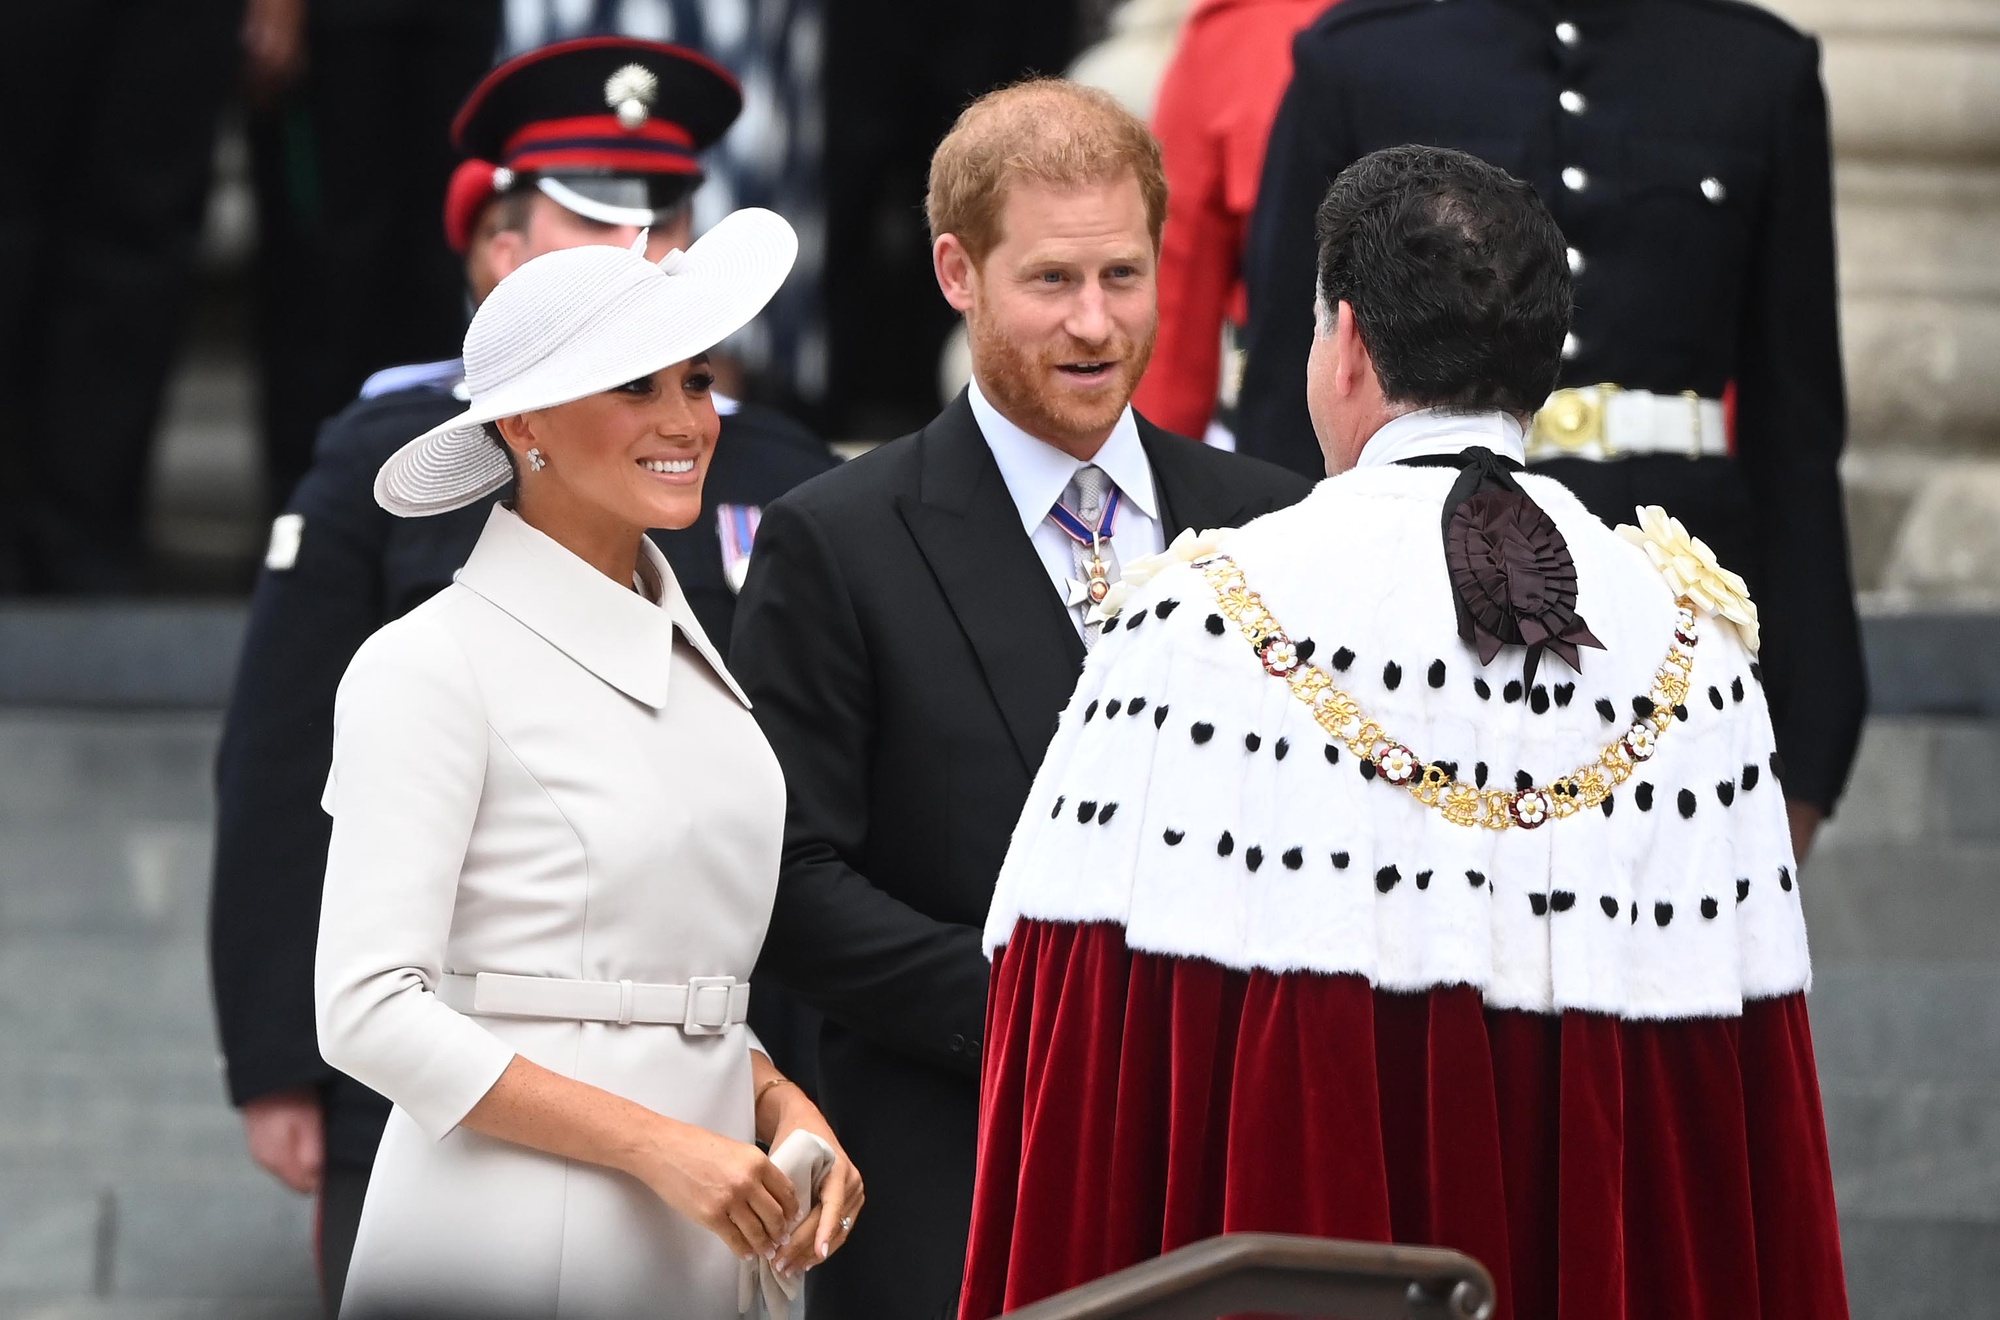 epa09993346 Meghan Markle (L), the Duchess of Sussex, and Prince Harry, The Duke of Sussex (C) arrive for the National Service of Thanksgiving as part of the celebrations of the Platinum Jubilee of Queen Elizabeth II, at St Paul&#039;s Cathedral in London, Britain, 03 June 2022. Queen Elizabeth II will not be attending the service after experiencing &#039;discomfort&#039;. The service celebrates the Queen&#039;s Platinum Jubilee, marking the 70th anniversary of her accession to the throne on 06 February 1952.  EPA/NEIL HALL